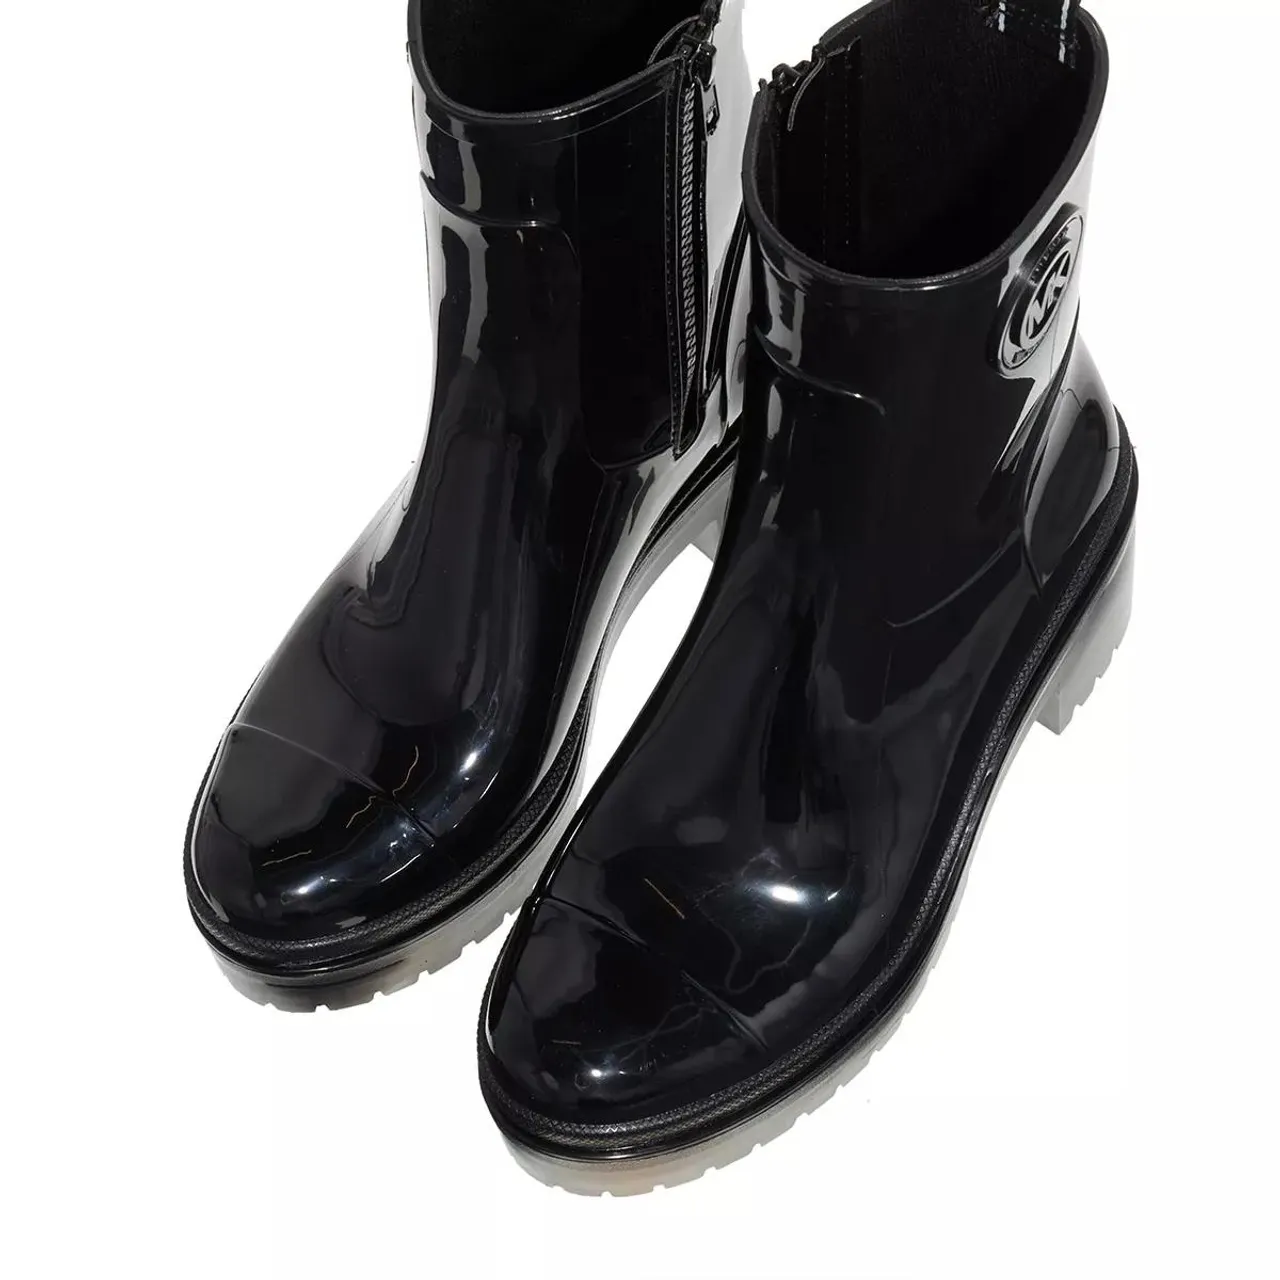 Michael Kors Boots & Ankle Boots - Karis Rainboot - black - Boots & Ankle Boots for ladies